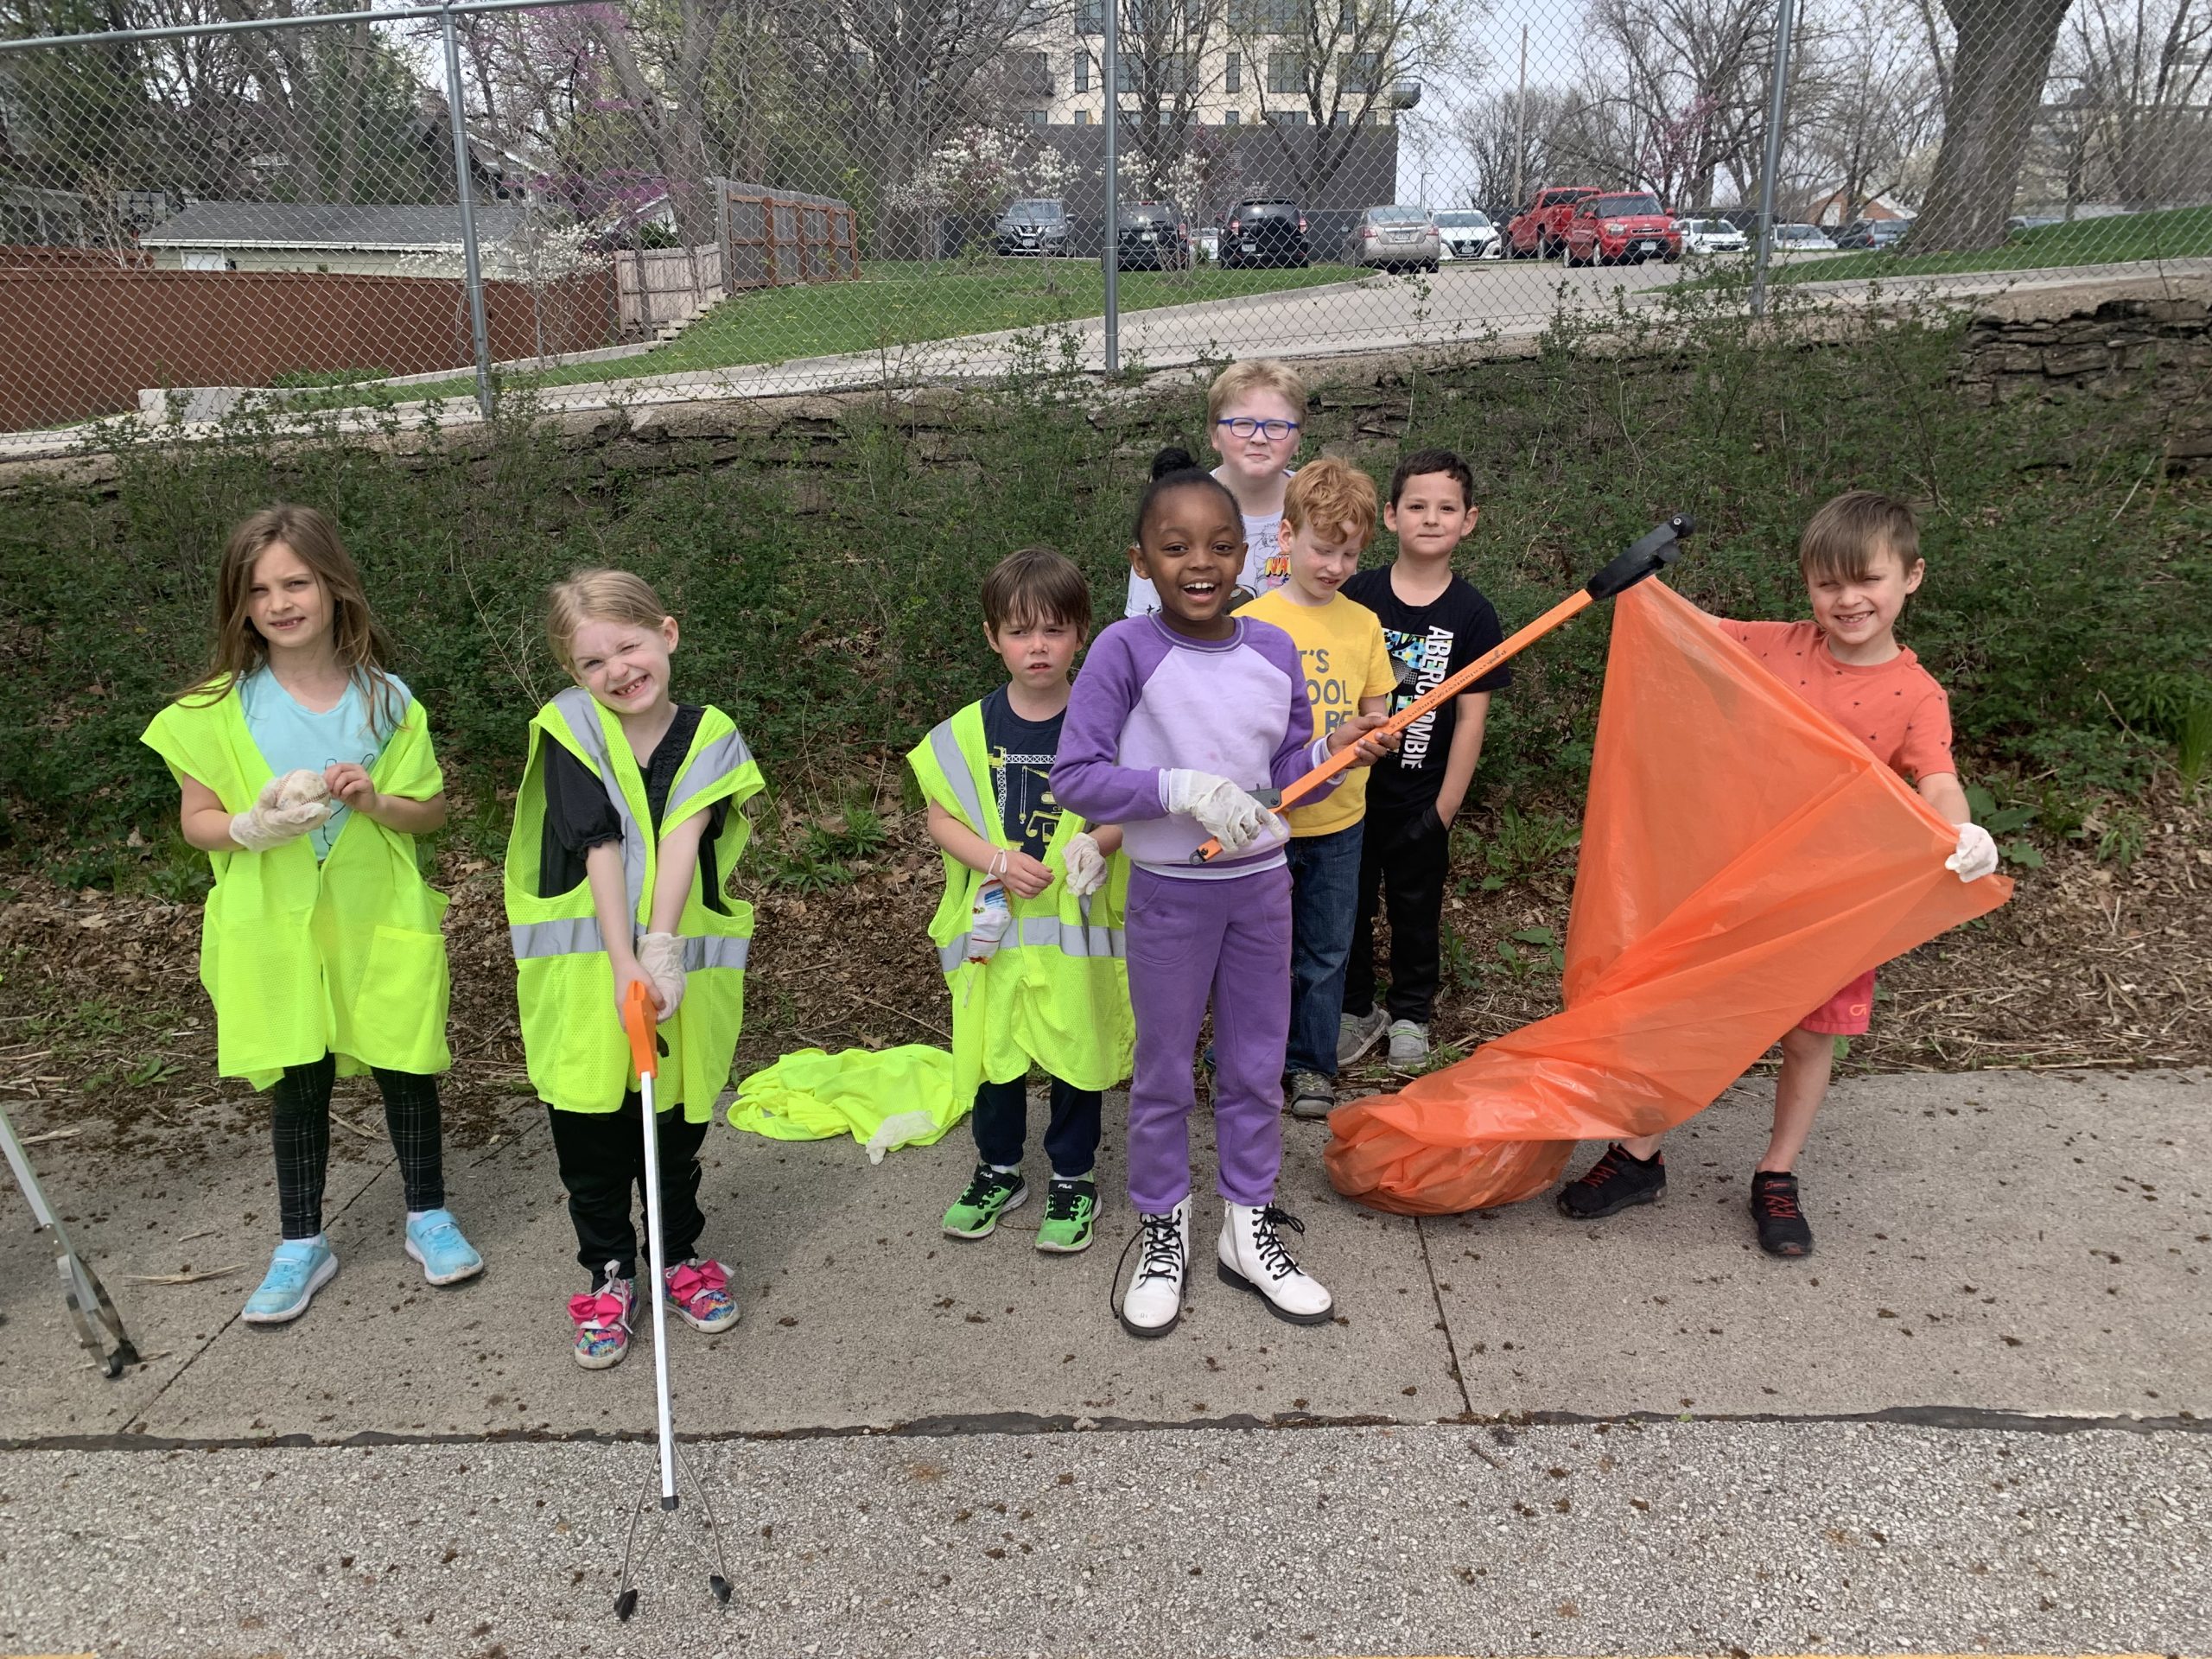 Students pose for a quick photo during the neighborhood cleanup walk